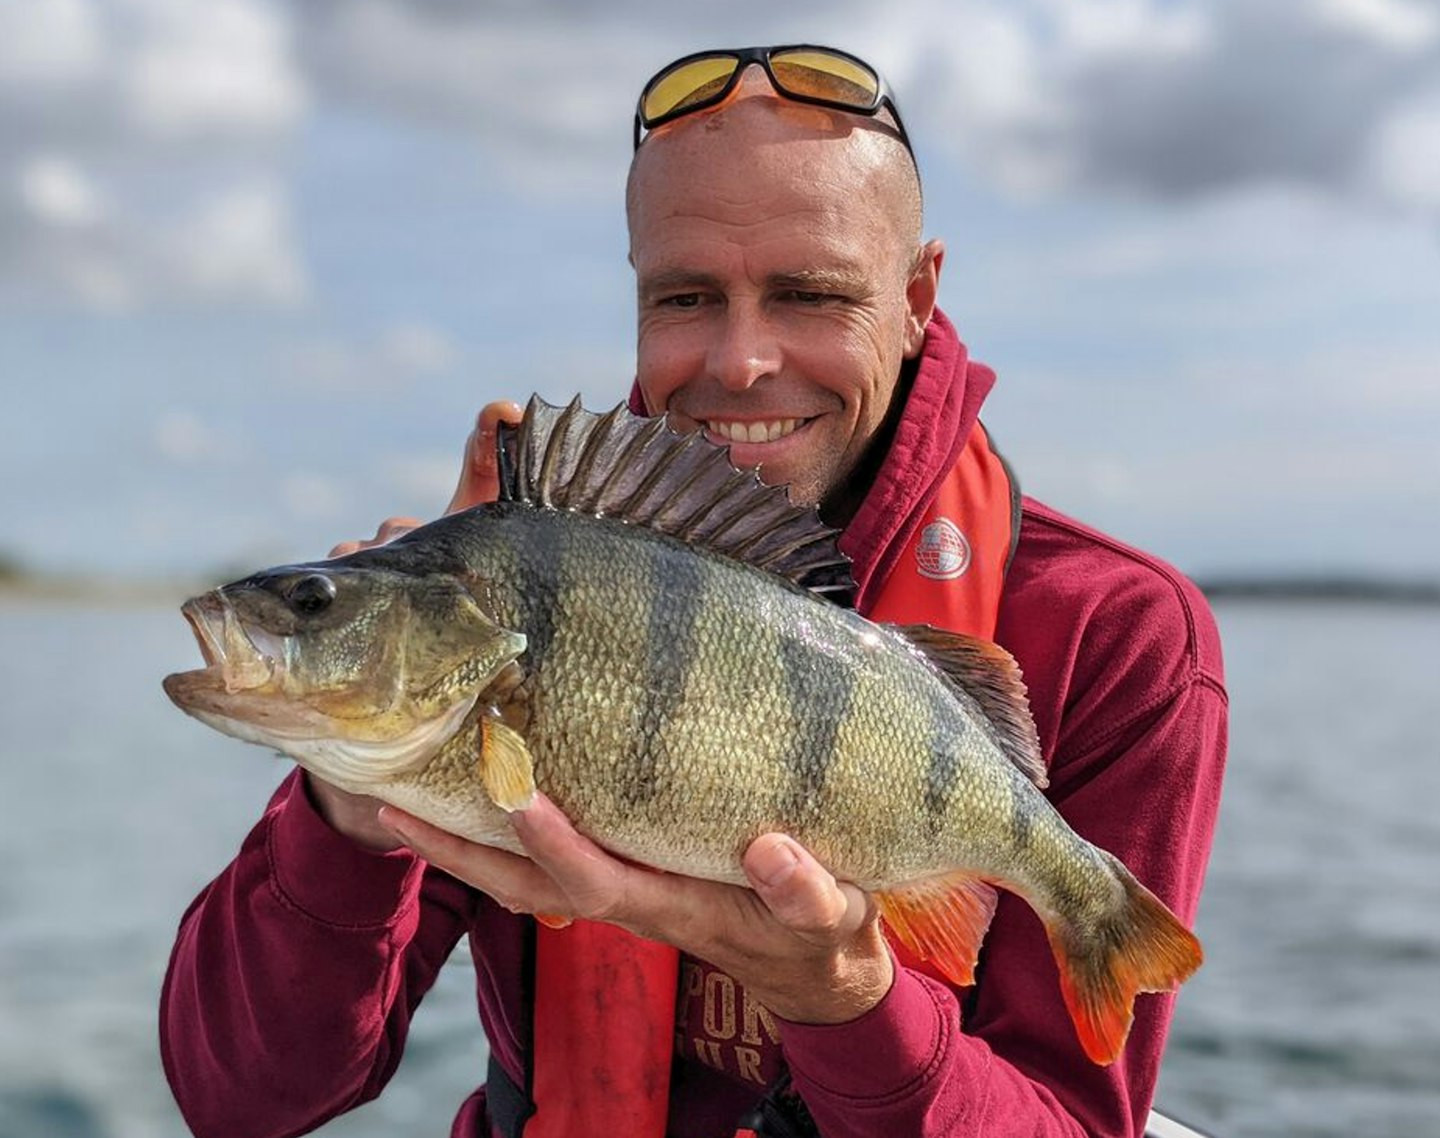 Dean Macey’s 20-year marathon search for a 4lb-plus perch ended with this monster